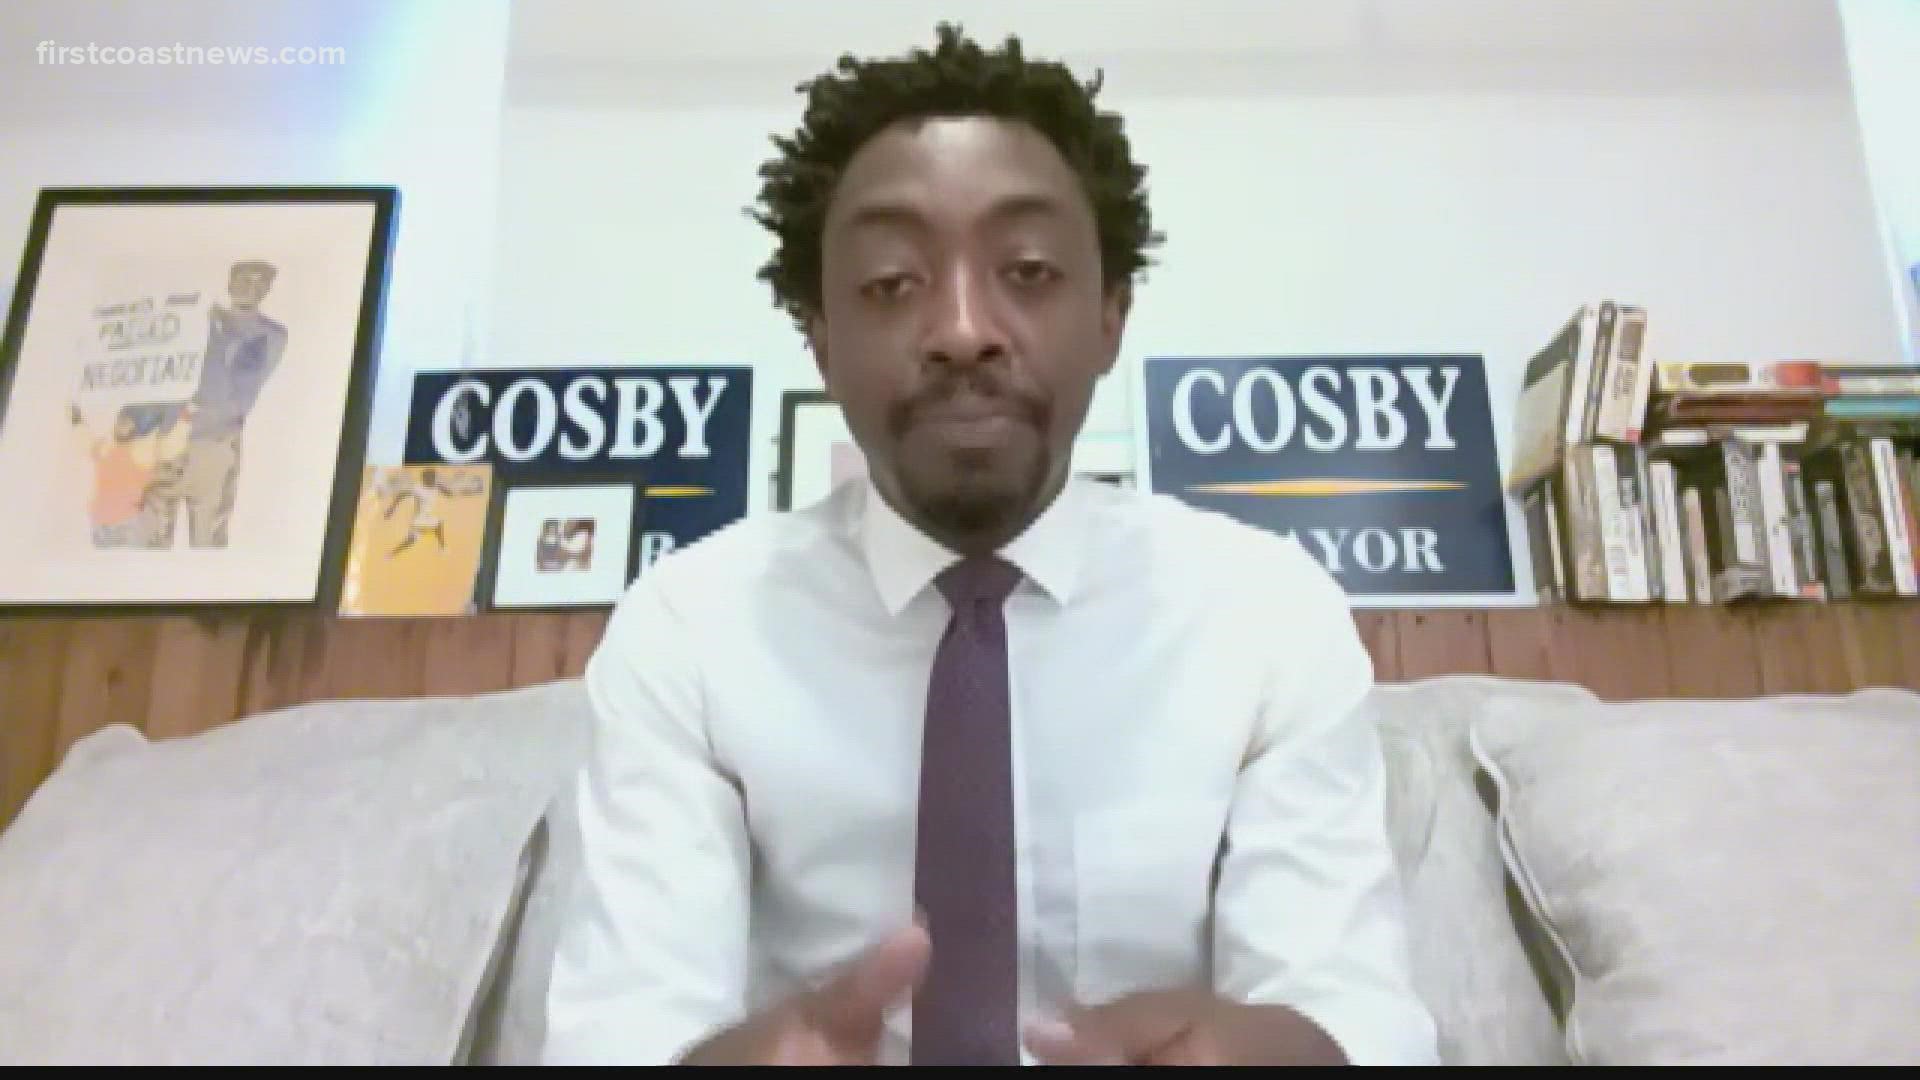 Cosby Johnson, 36, will become the 60th mayor of Brunswick, Georgia on January 5, 2022.